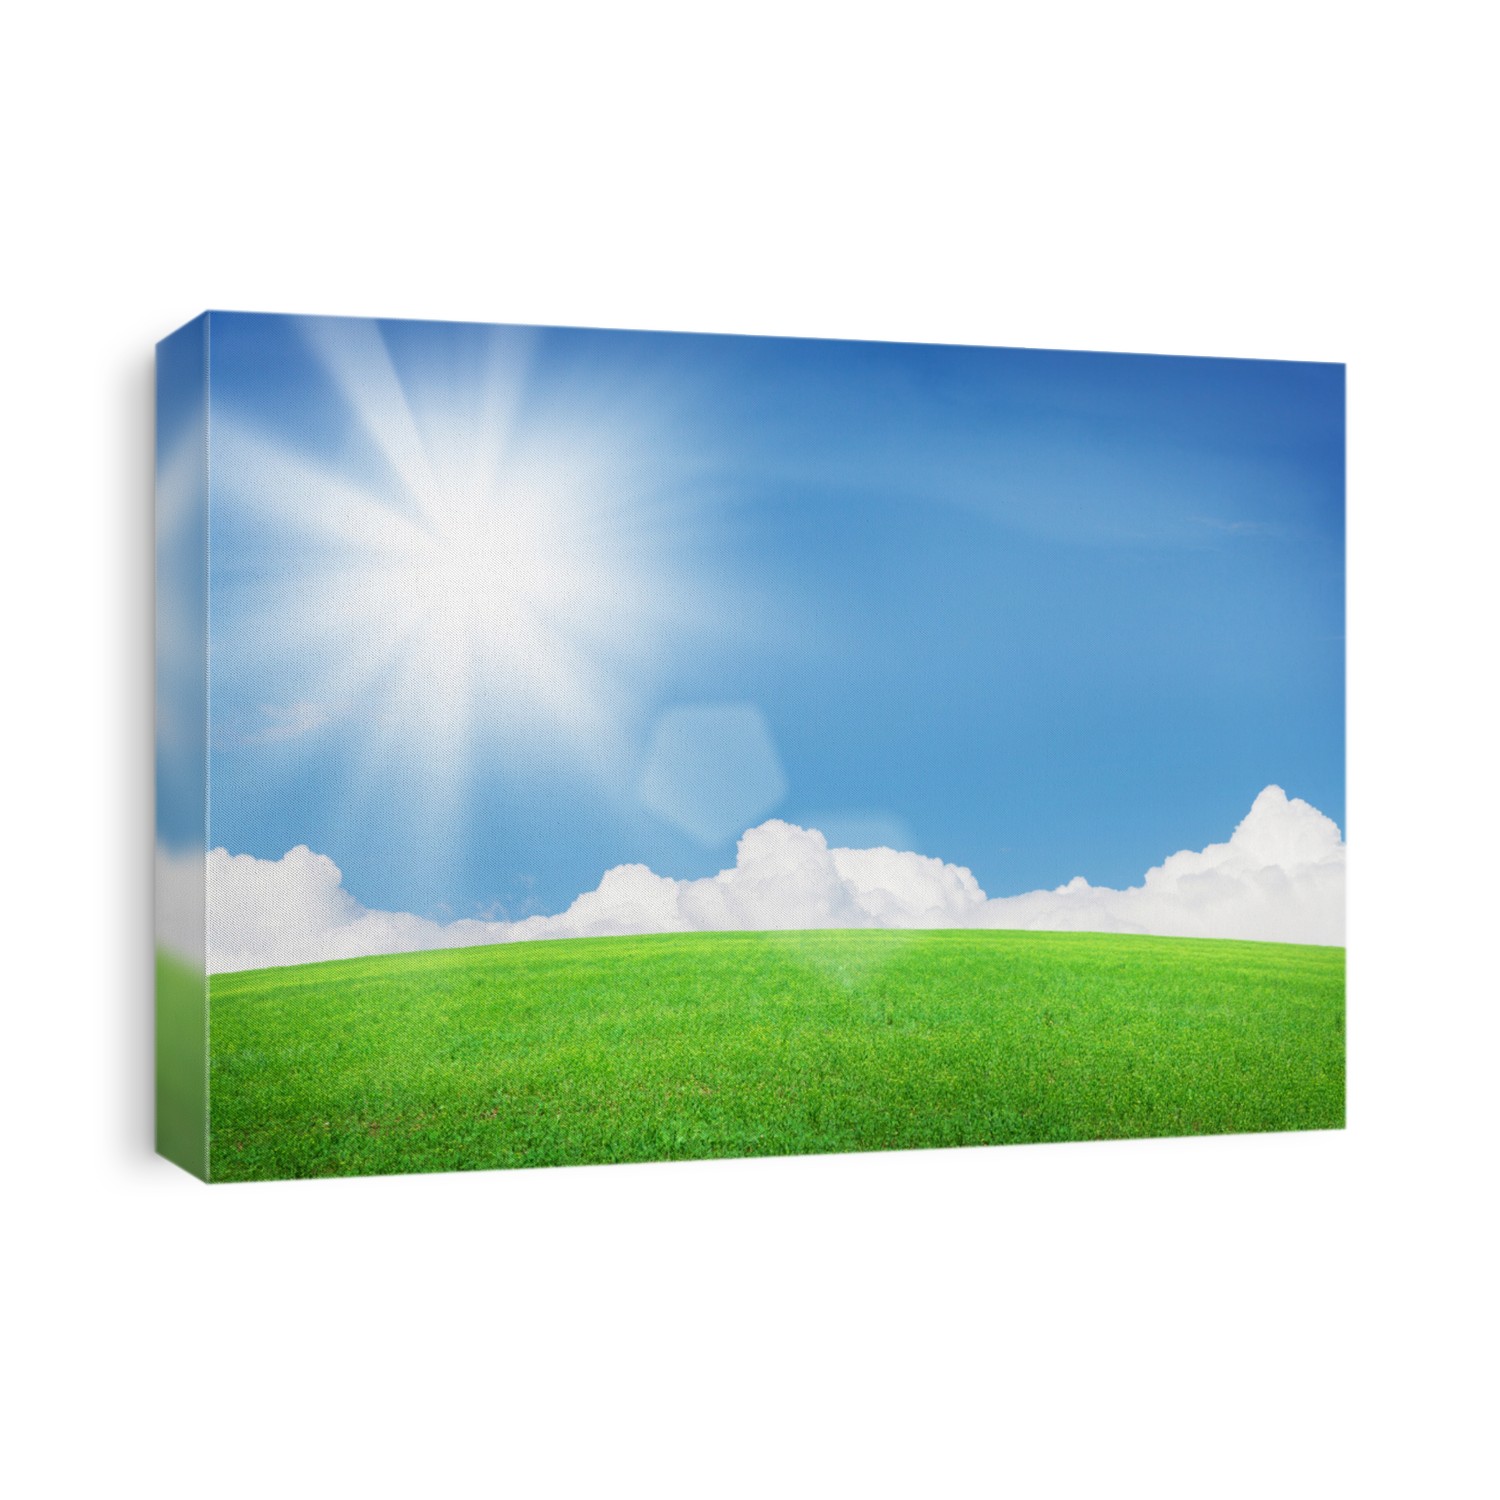 Green grass field and blue sky with clouds and bright sun. Summer landscape